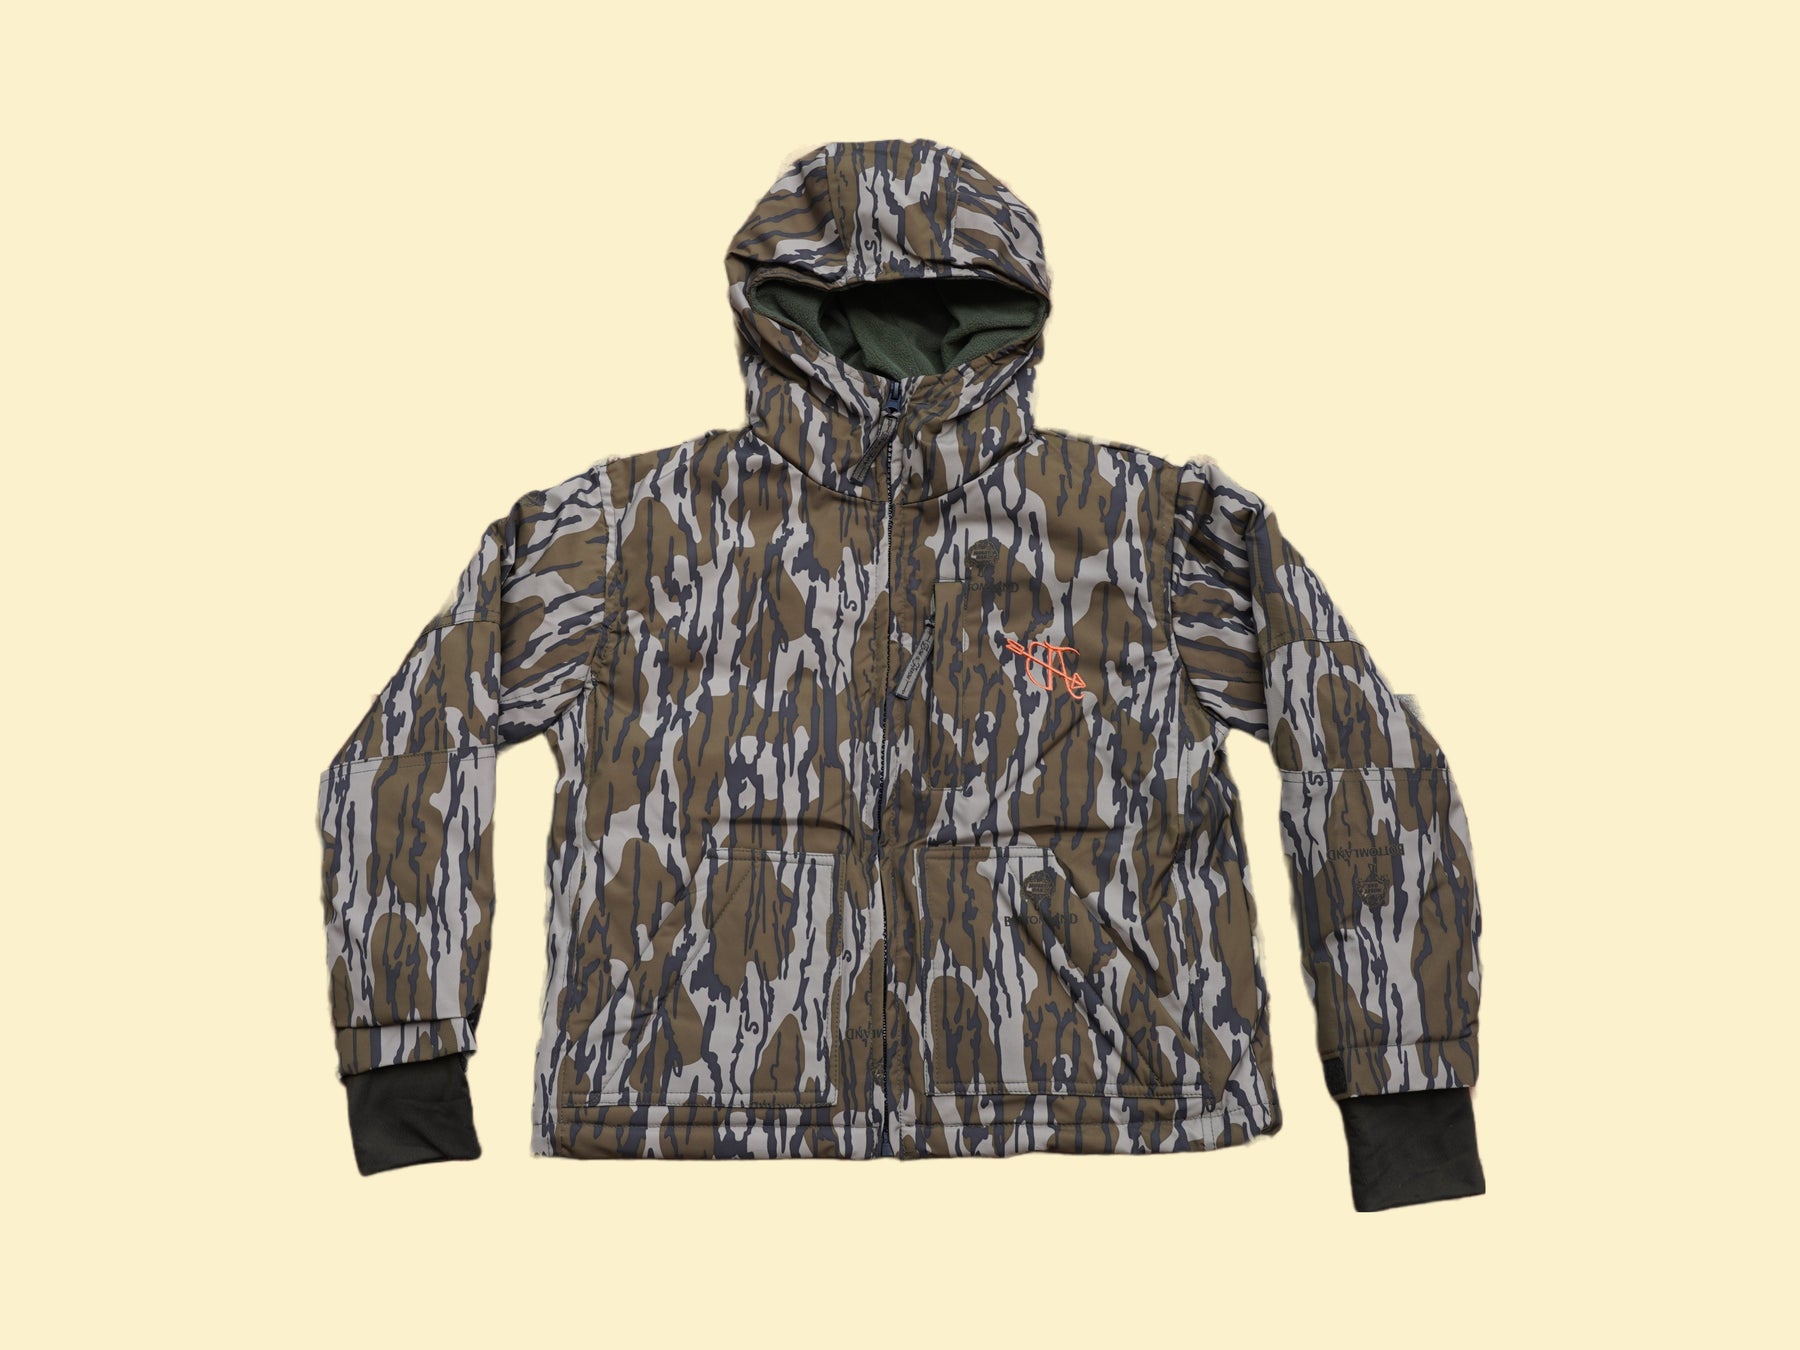 Heavy Weight Hunting Jacket by Bow and Arrow Outdoors - Sportsman Gear